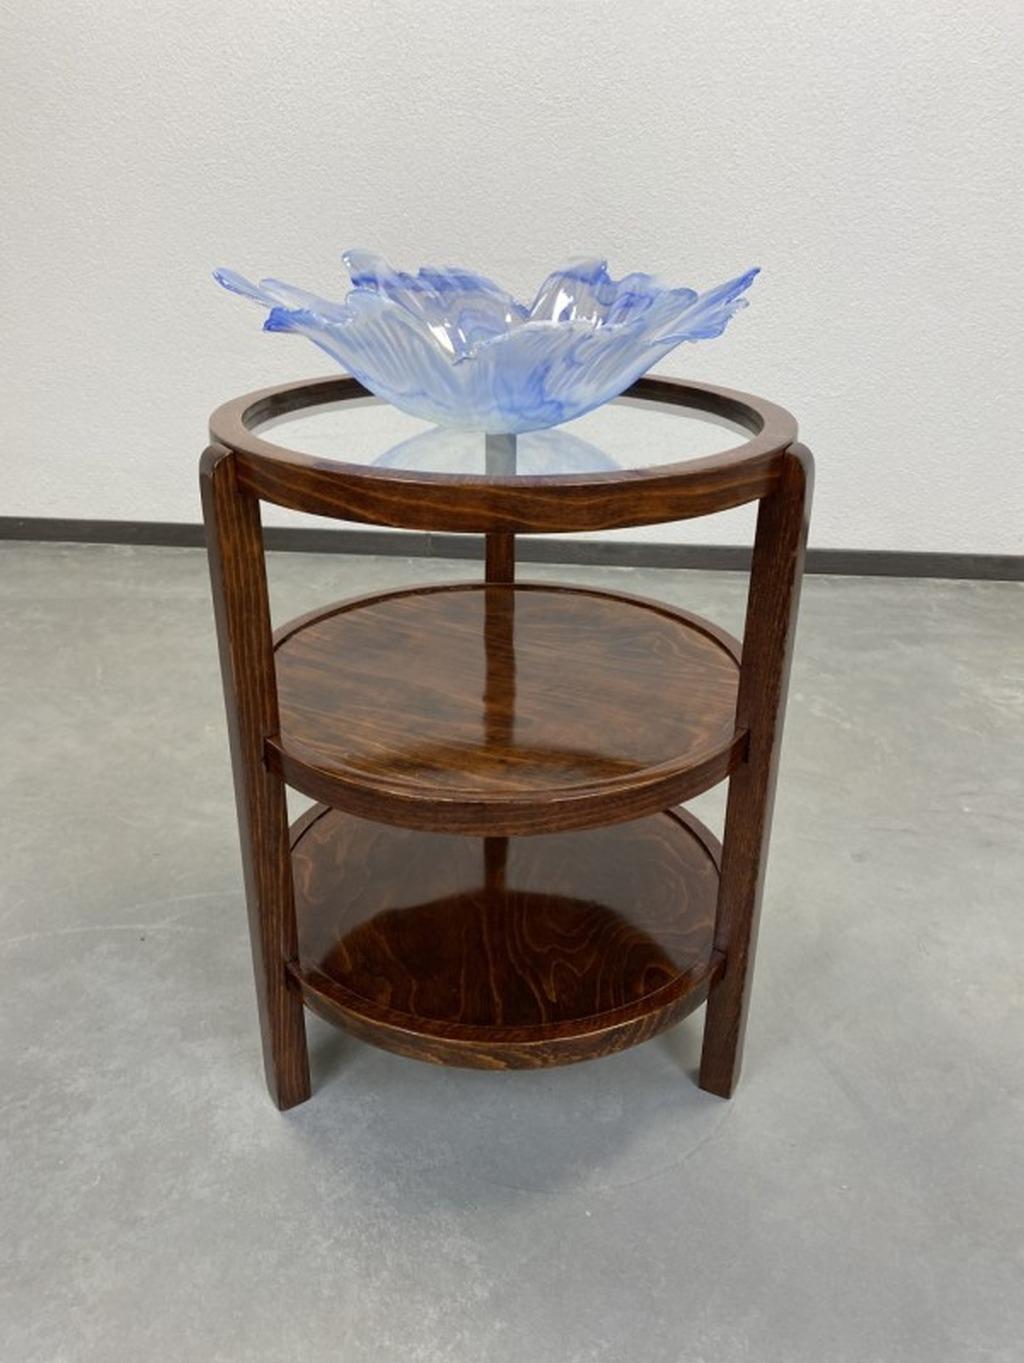 Thonet Mundus side table. Professionally stained and repolished with original glass tops.